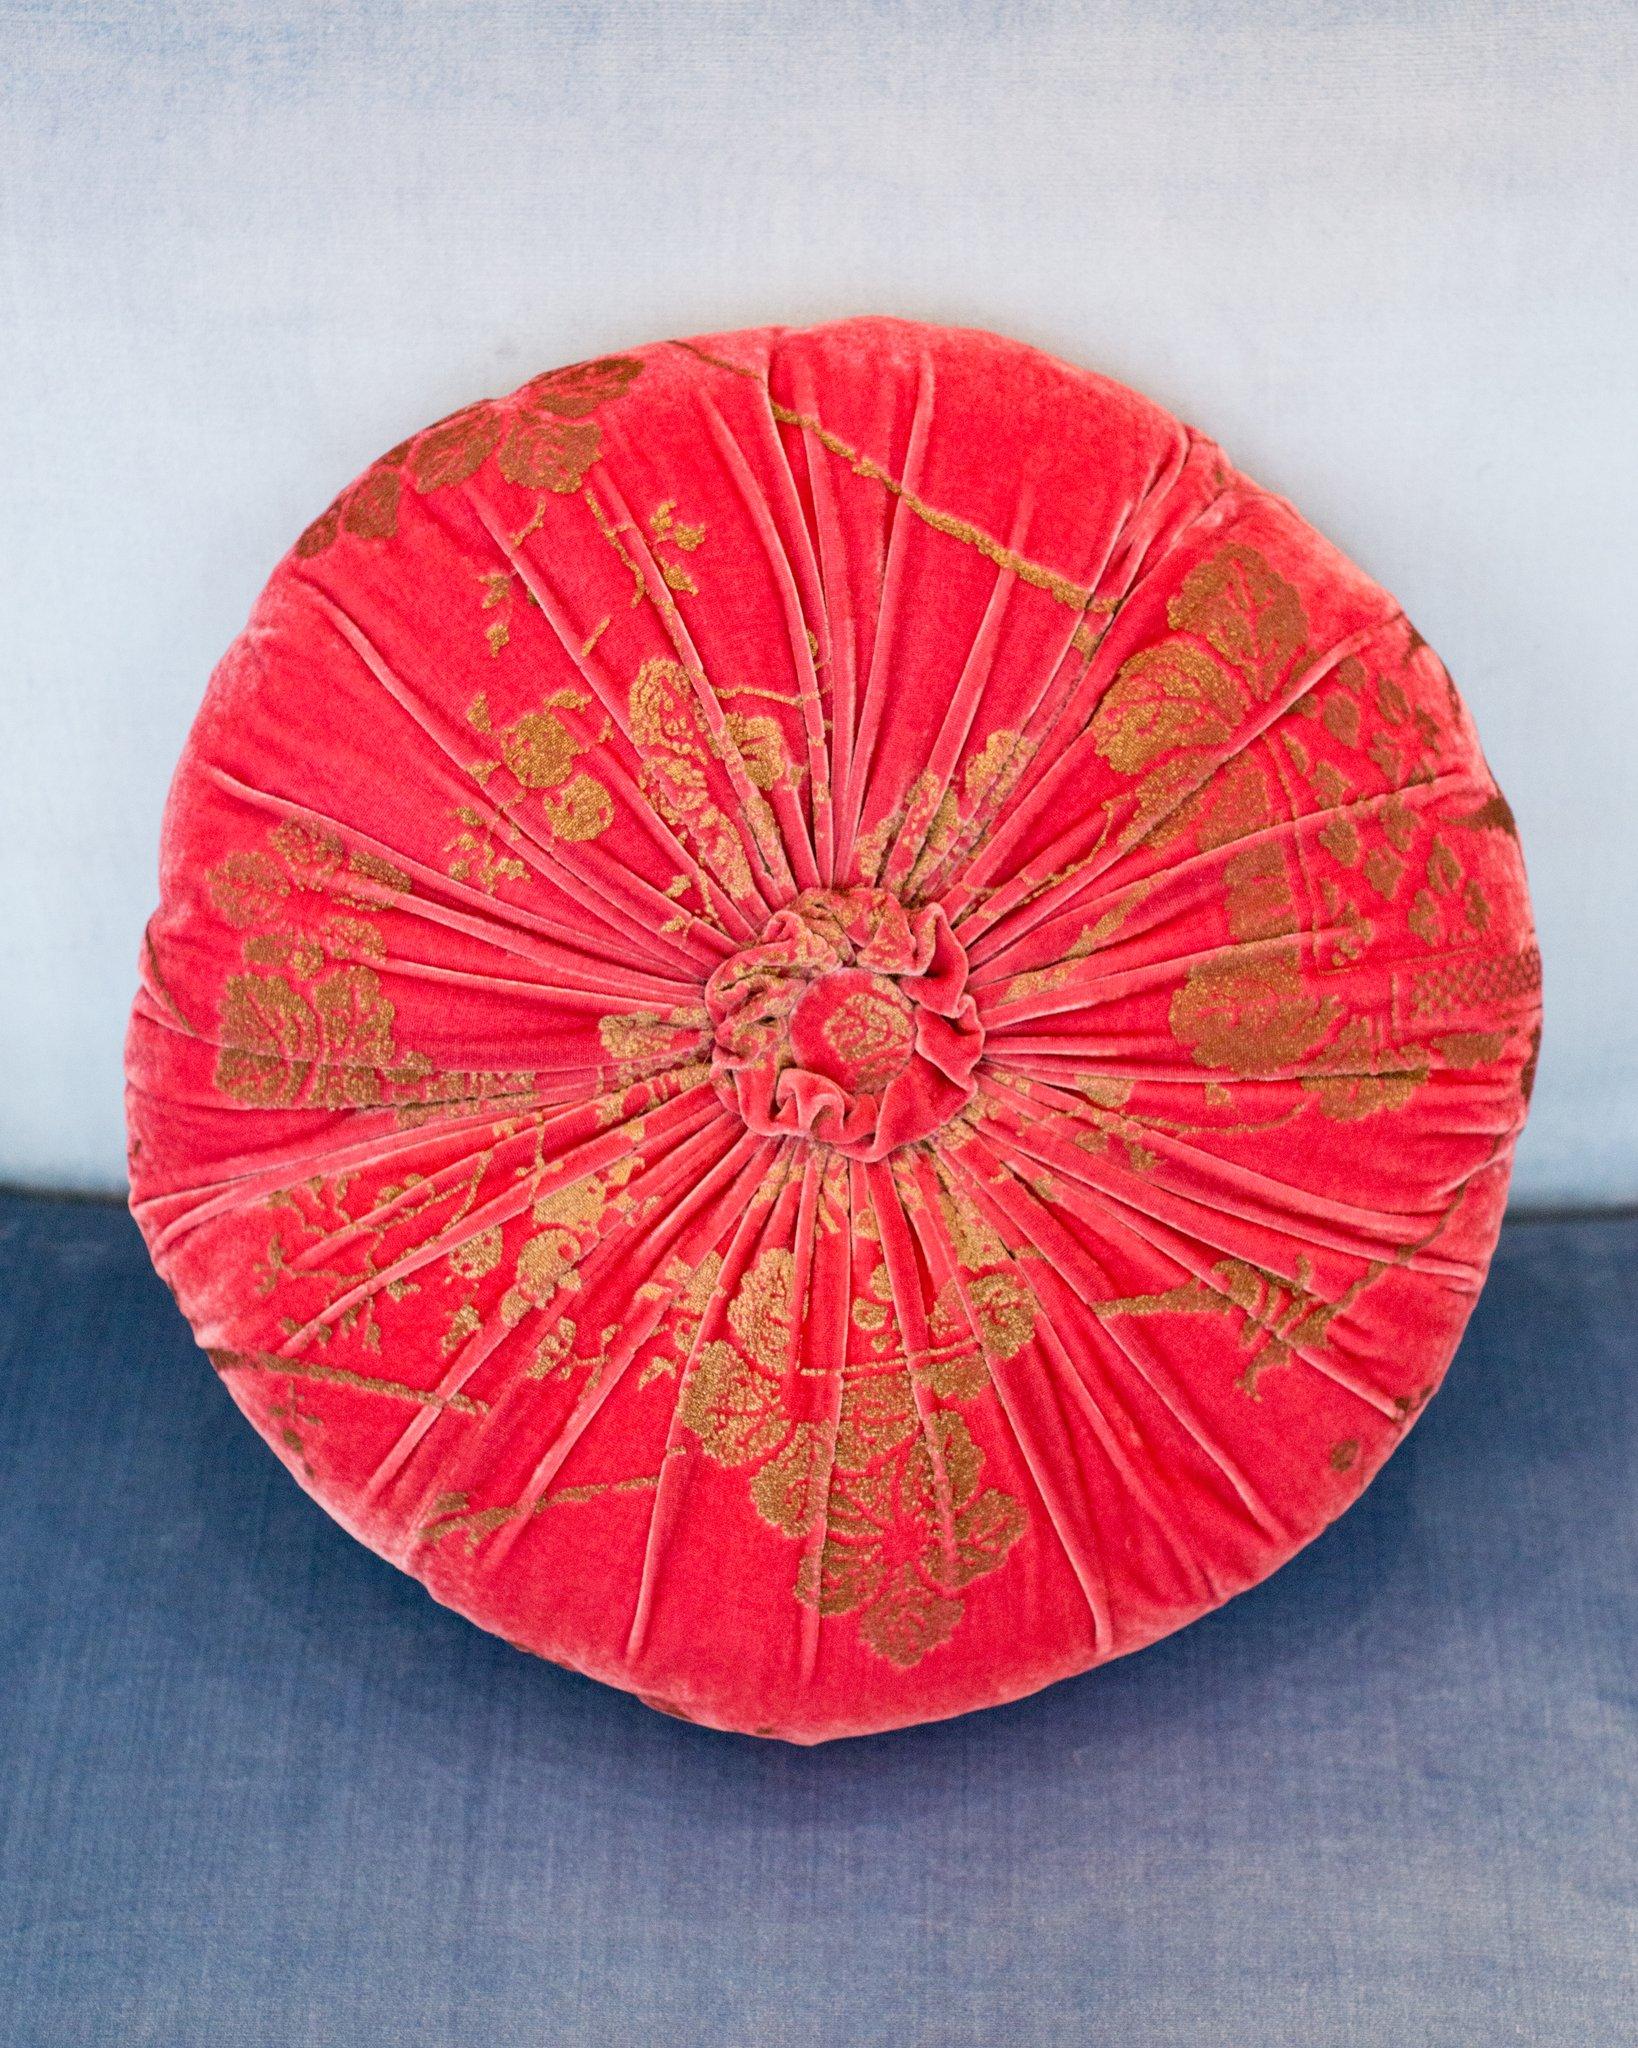 A beautiful Fortuny / Venetia Stadium round pillow with pleats and a center tuft in strawberry pink velvet with gold, made in Venice.

Mario Fortuny was born in 1871 in Granada Spain and after a childhood marked by the premature death of his father